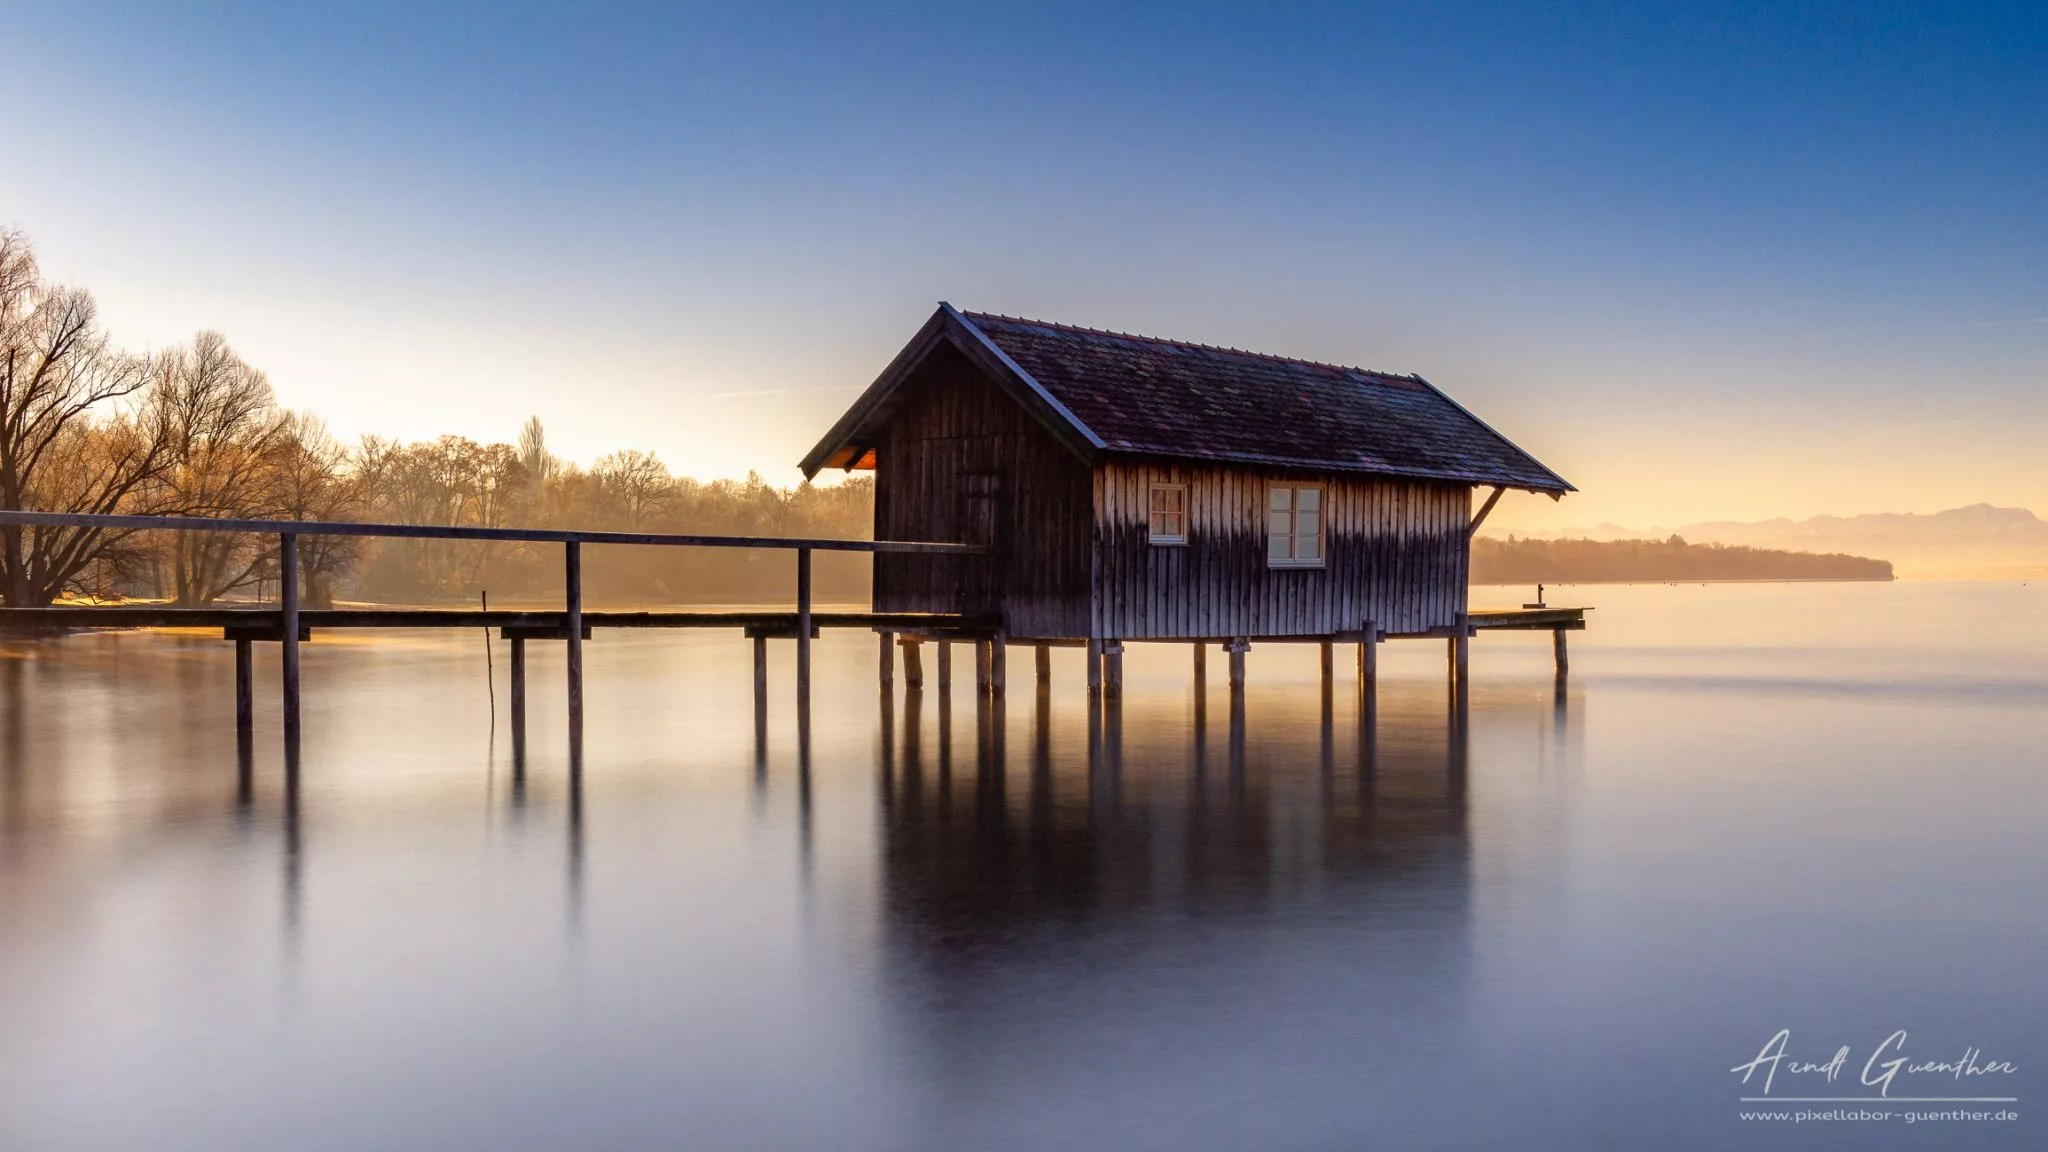 Boathouse at the Ammersee, Germany